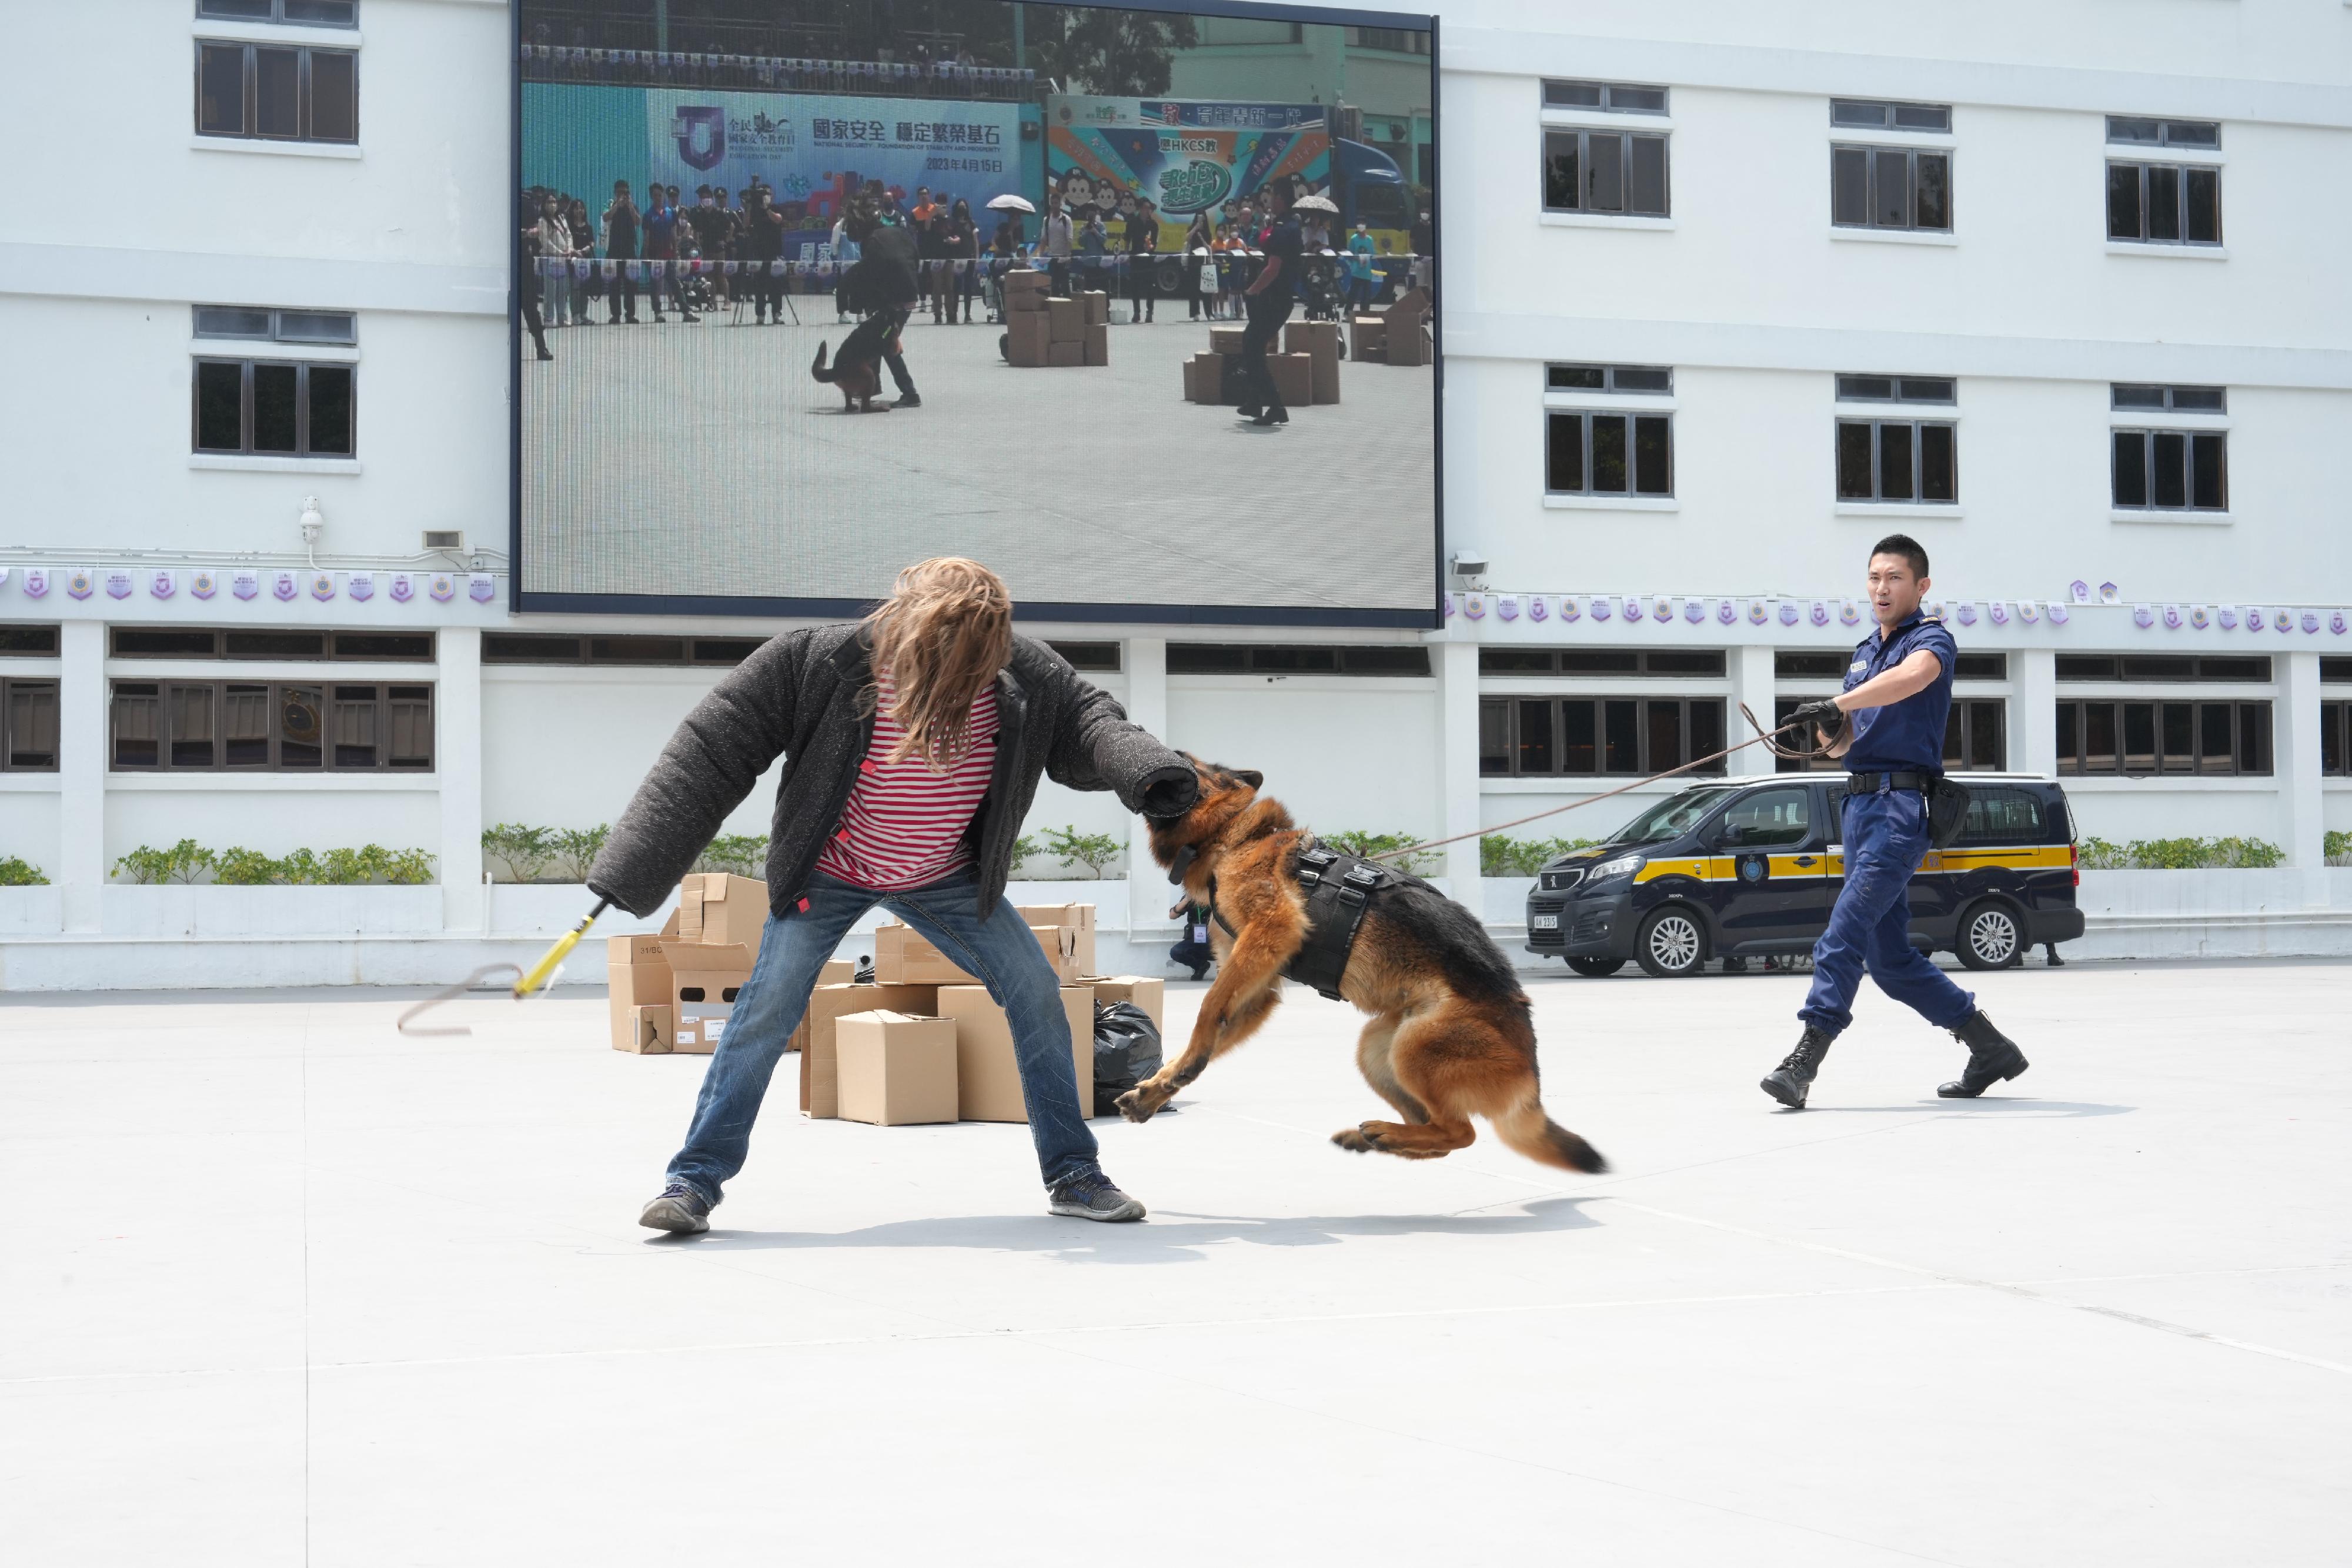 The Correctional Services Department held an open day at the Hong Kong Correctional Services Academy today (April 15), the National Security Education Day, to deepen the public's understanding of national security and the work of the department, including its work and effectiveness in safeguarding national security. Photo shows a demonstration by the Dog Unit.